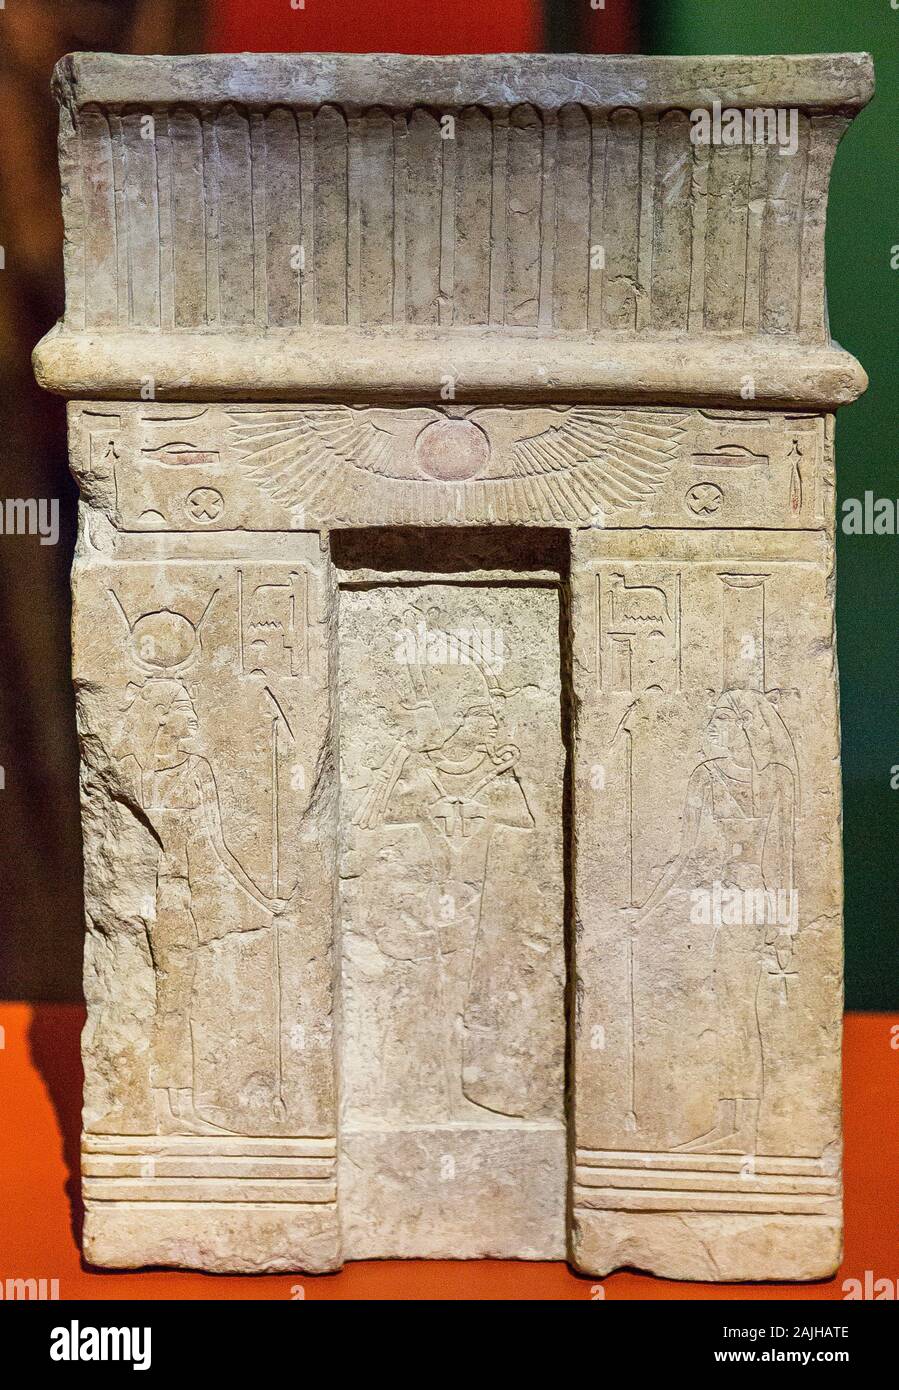 Photo taken during the opening visit of the exhibition “Osiris, Egypt's Sunken Mysteries”.  Stele in the form of a temple facade. Stock Photo